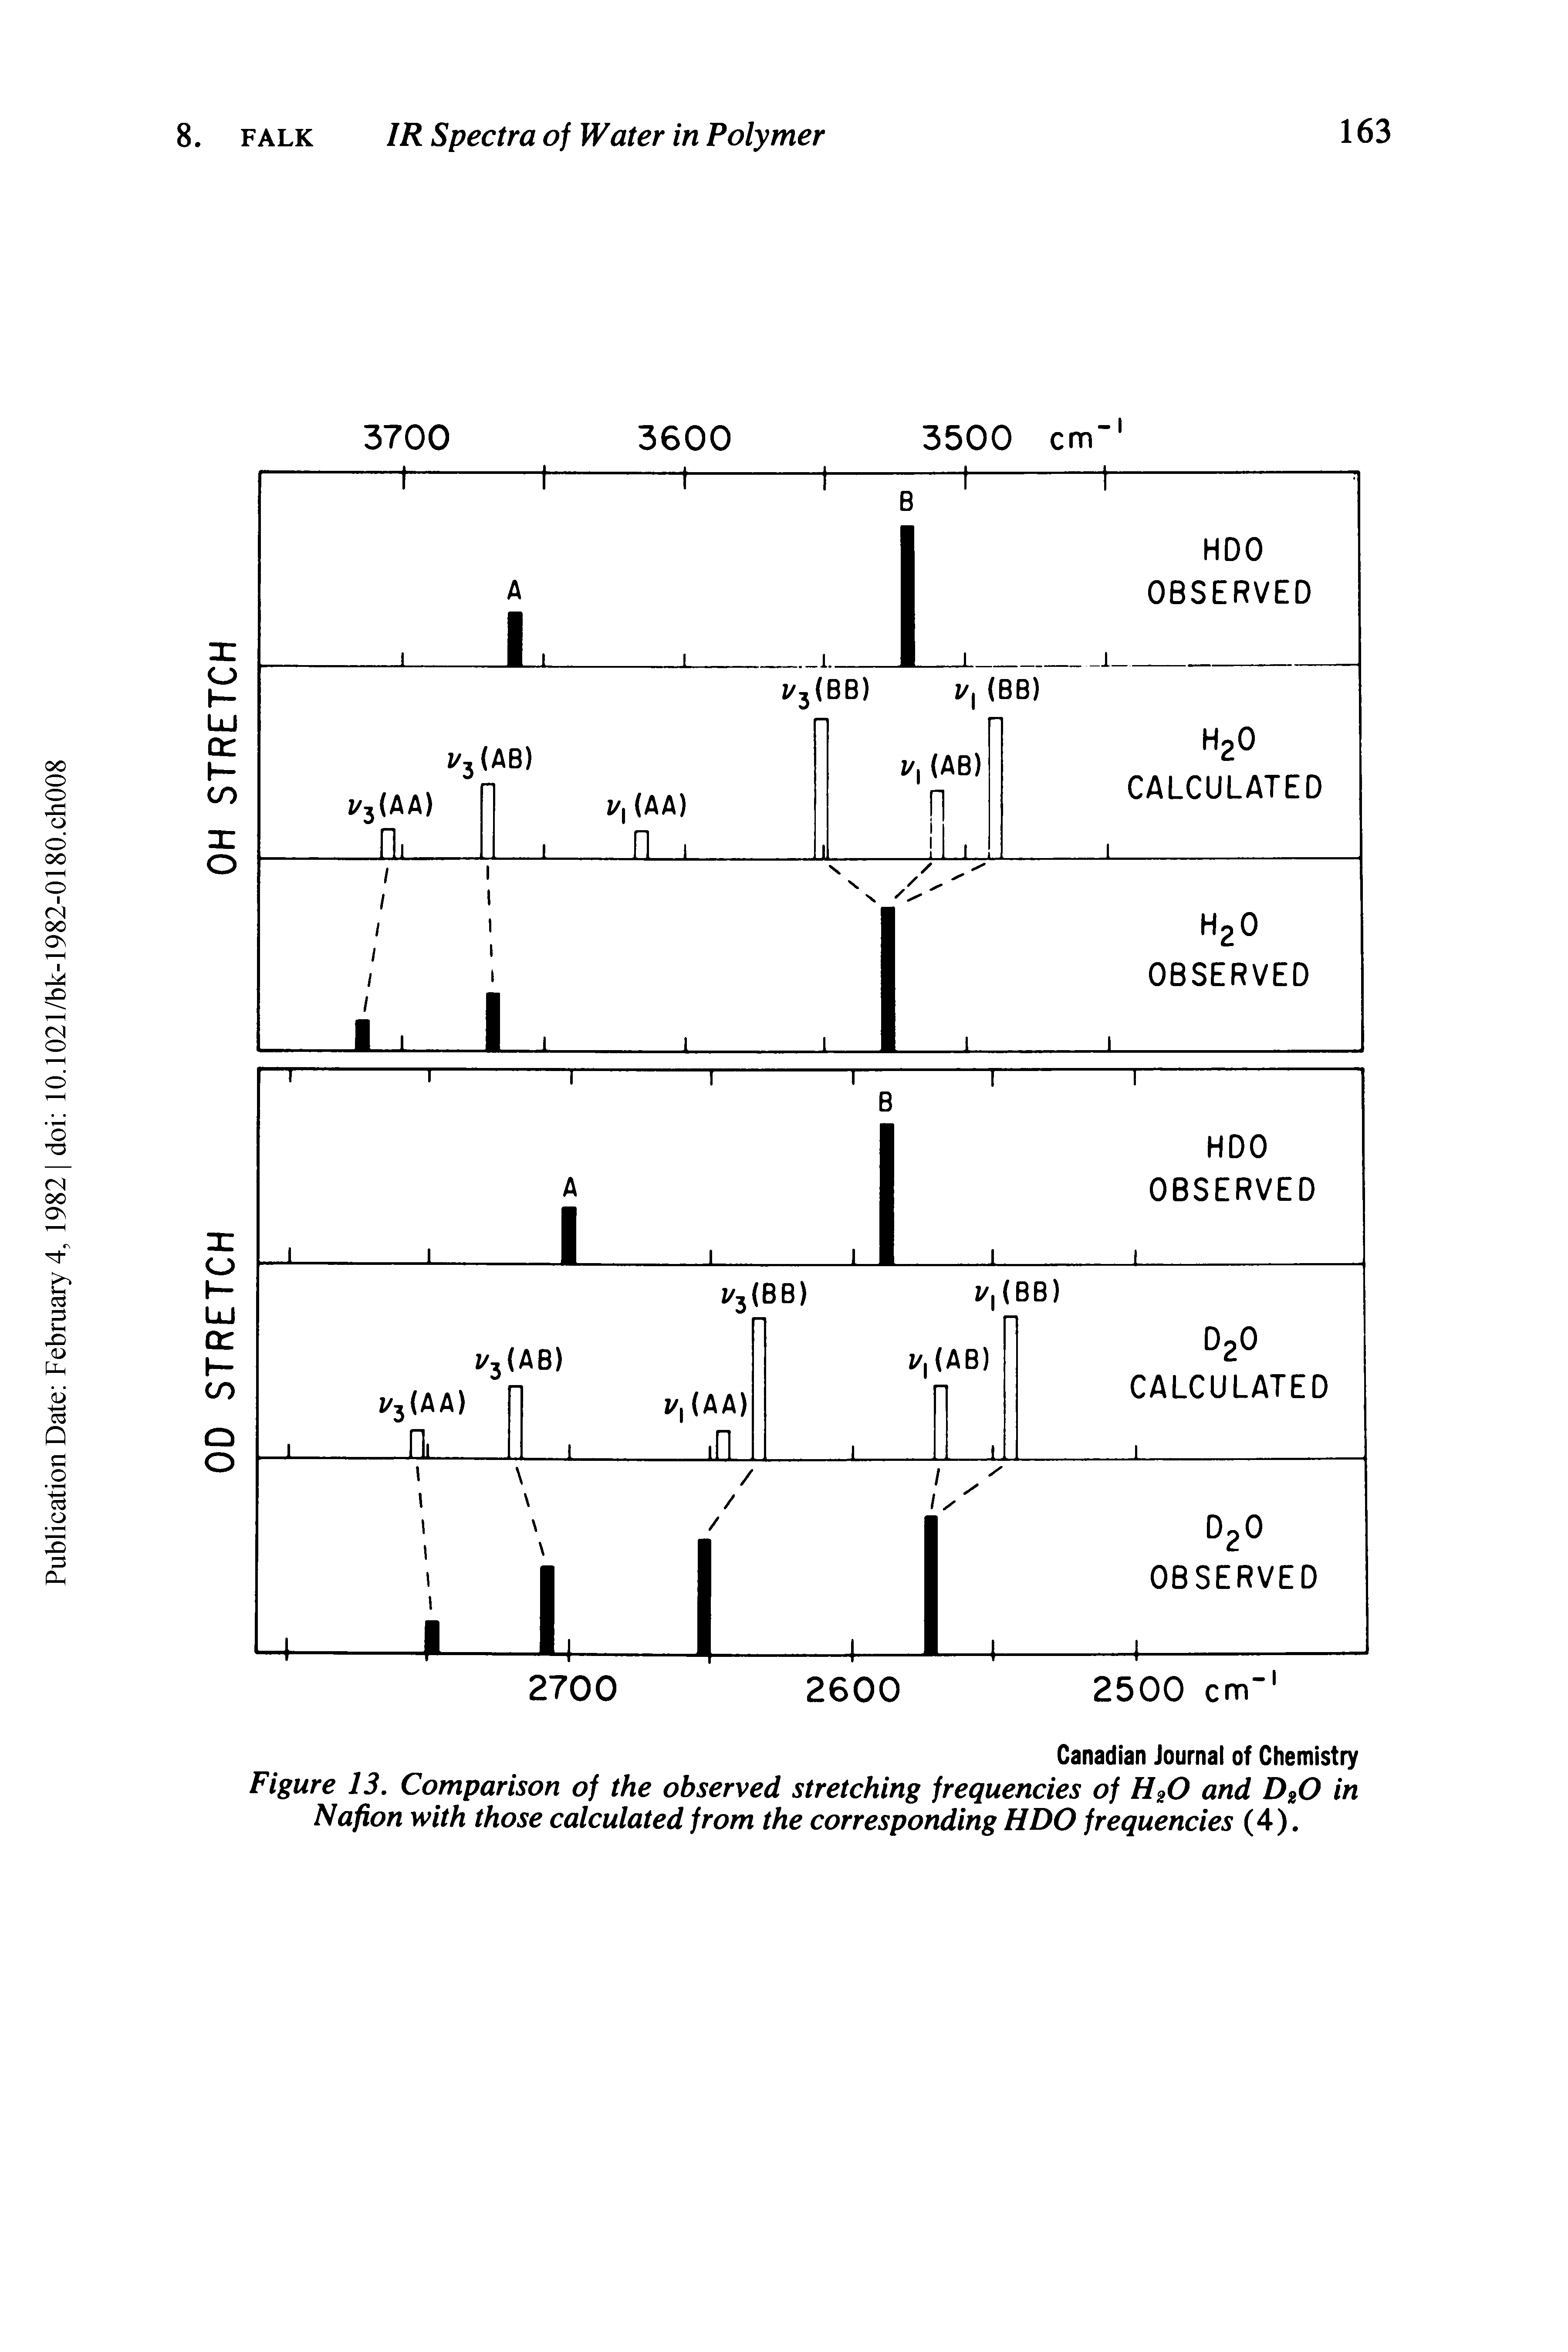 Figure 13. Comparison of the observed stretching frequencies of H20 and D20 in Nafion with those calculated from the corresponding HDO frequencies (4).